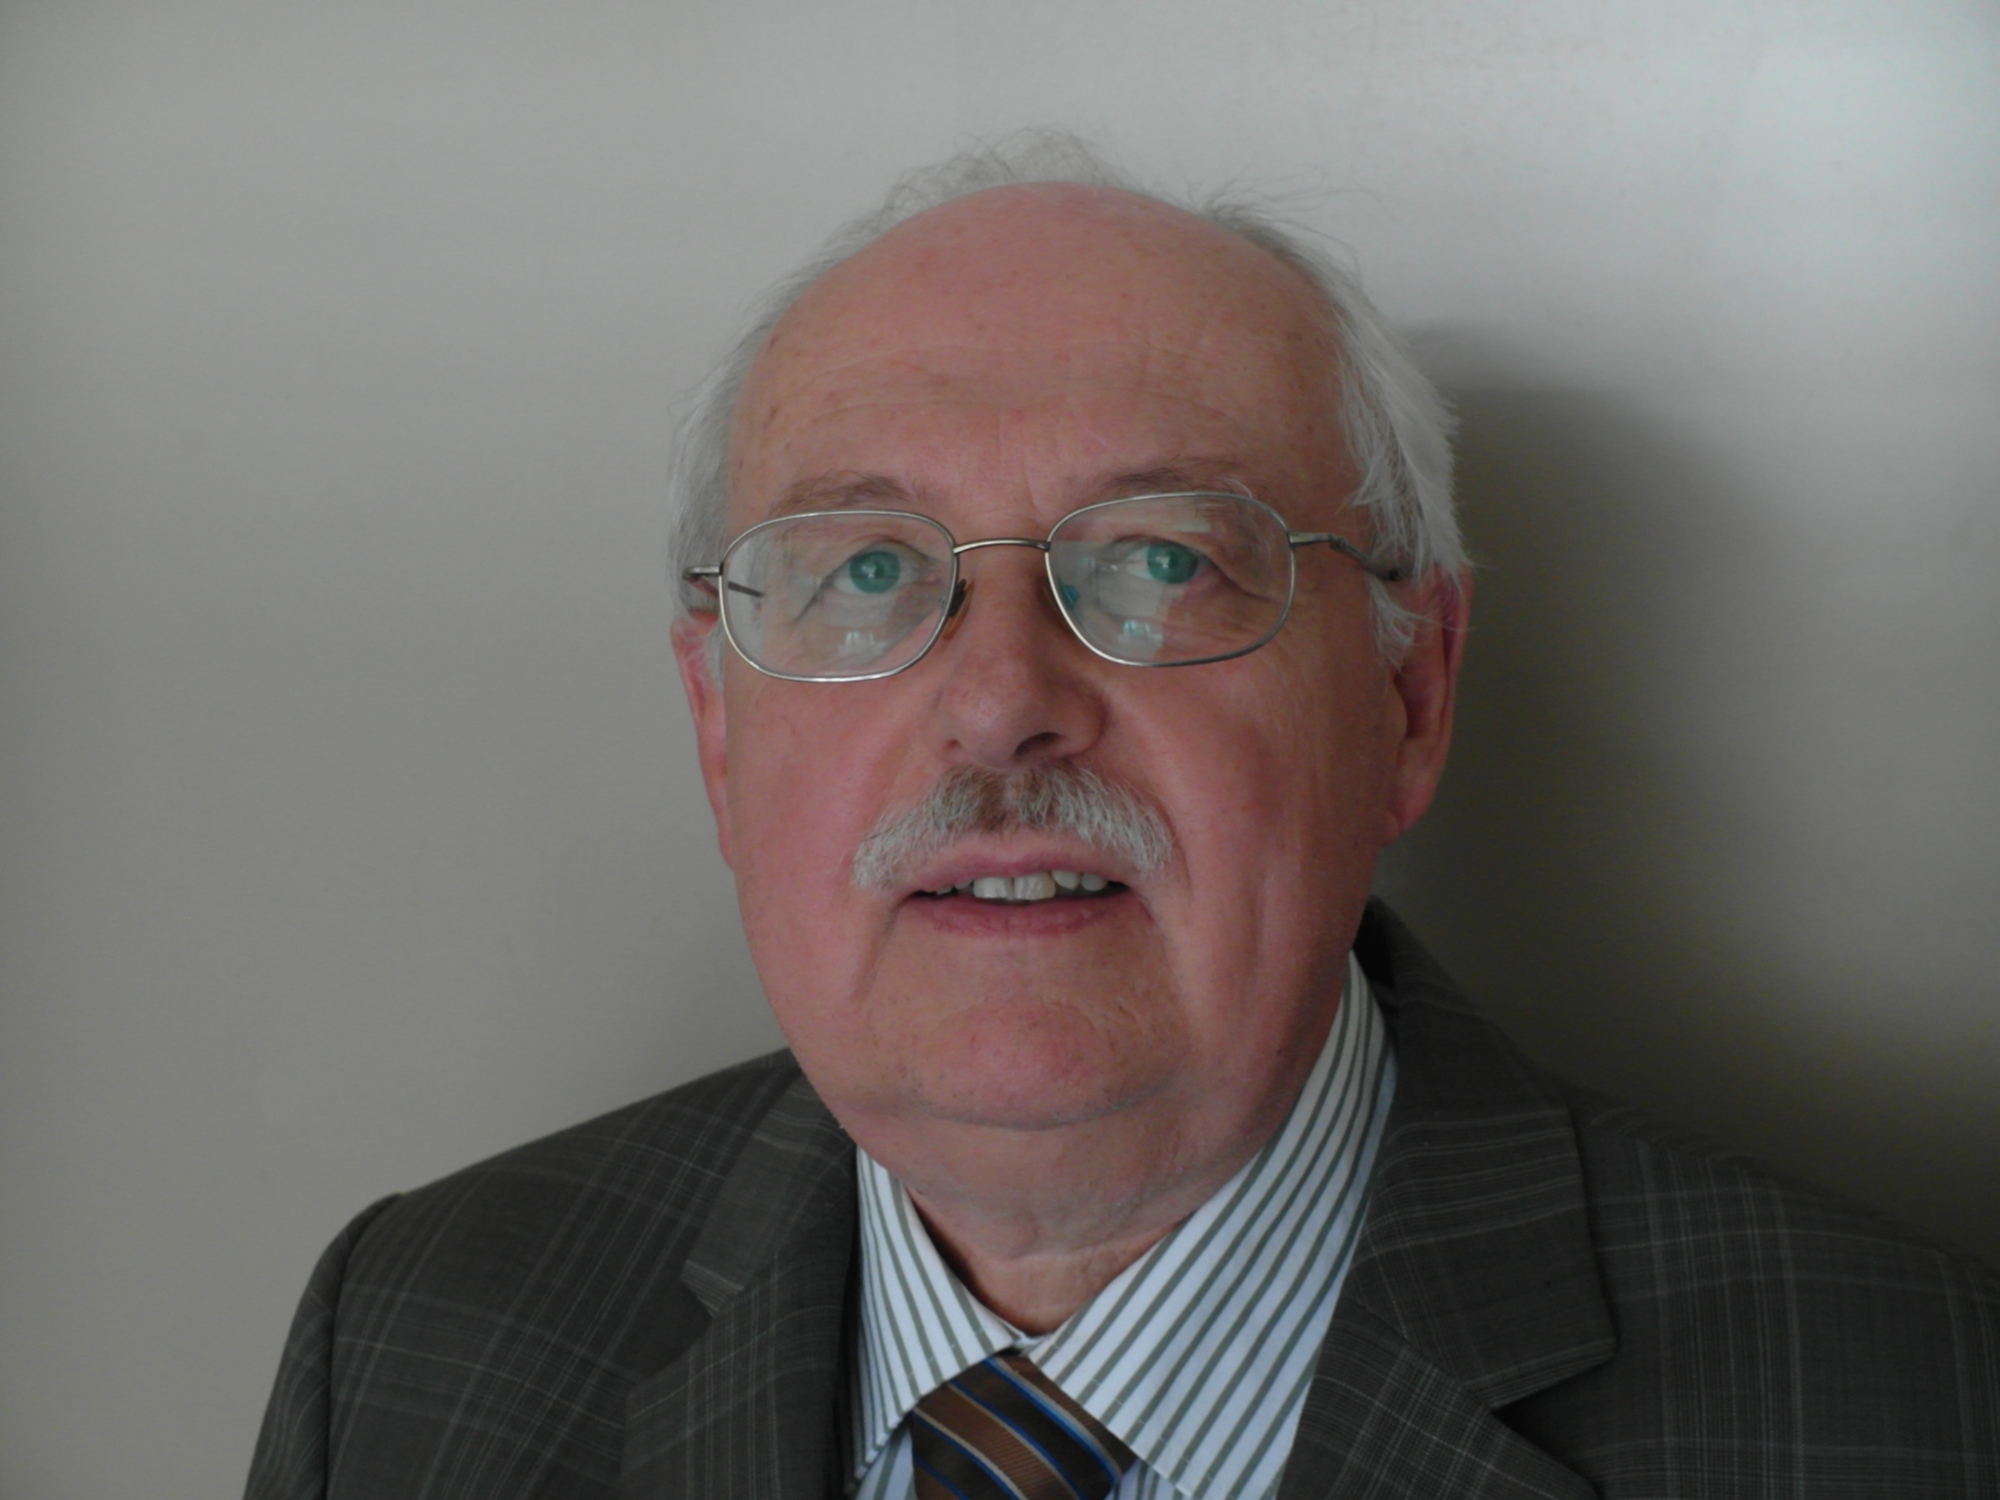 This image shows Prof. Dr. techn. Wolfgang M. Rucker